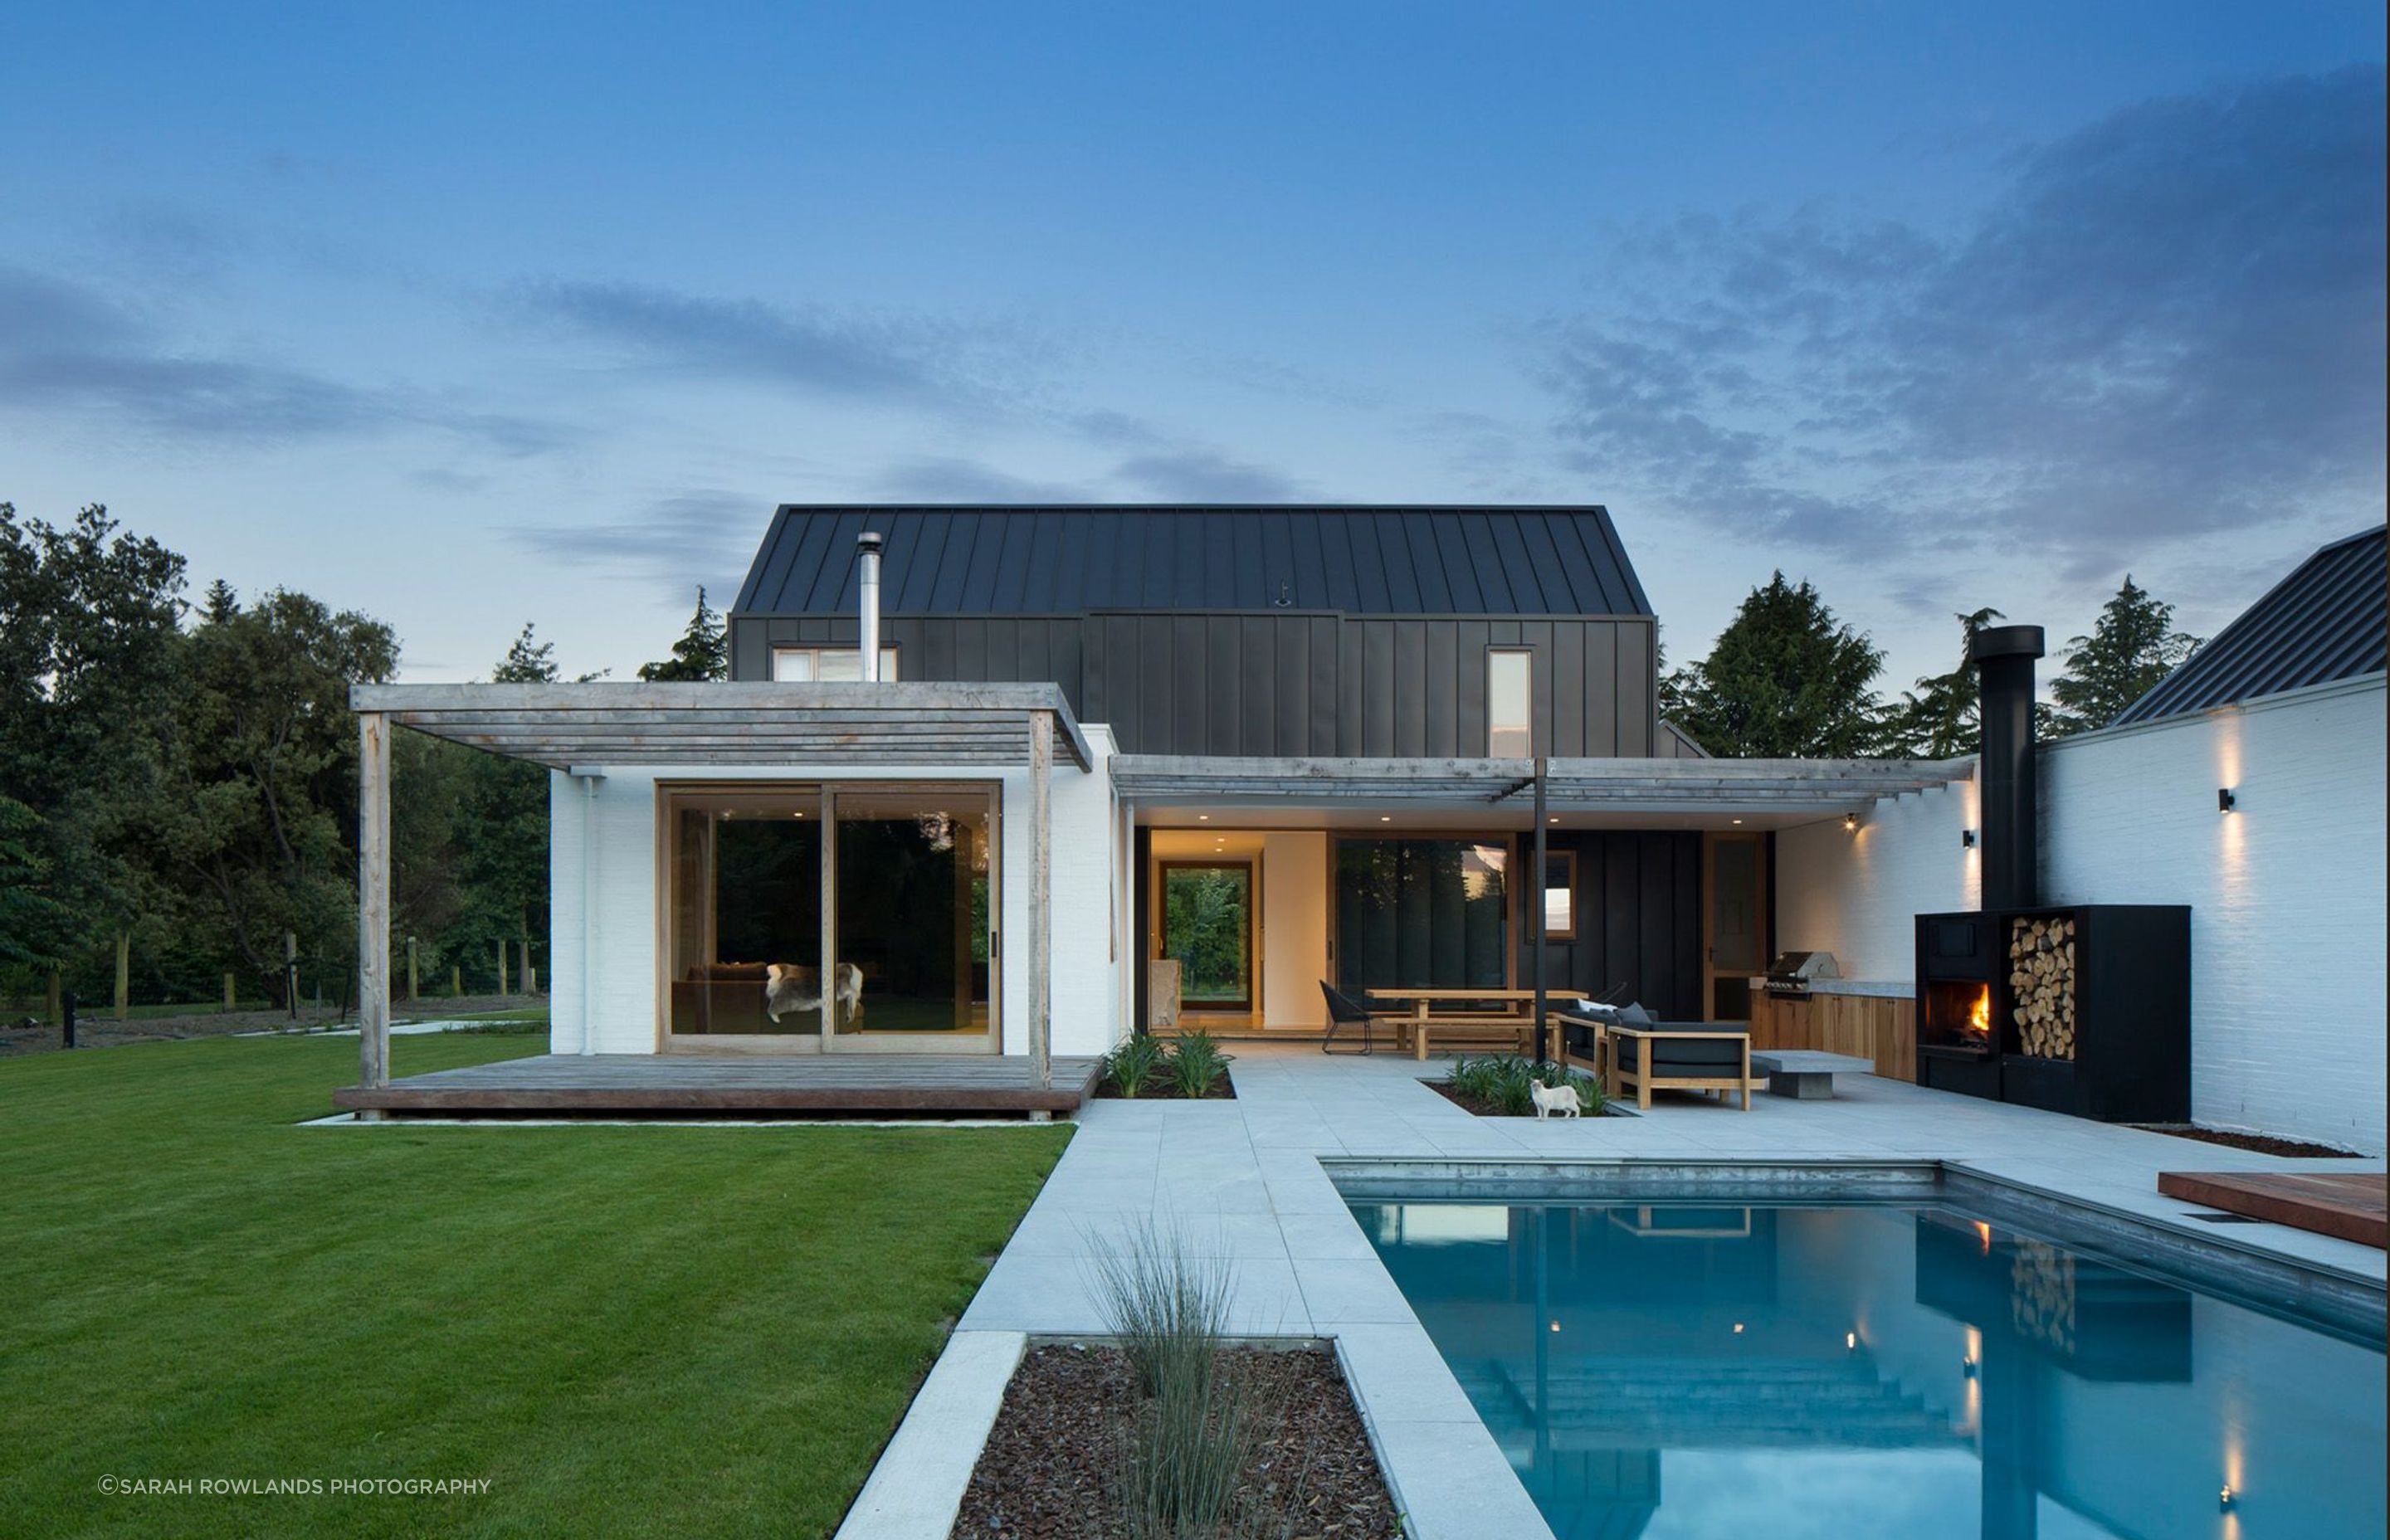 The swimming pool/entertaining space at twilight. The fireplace features built-in wood storage.